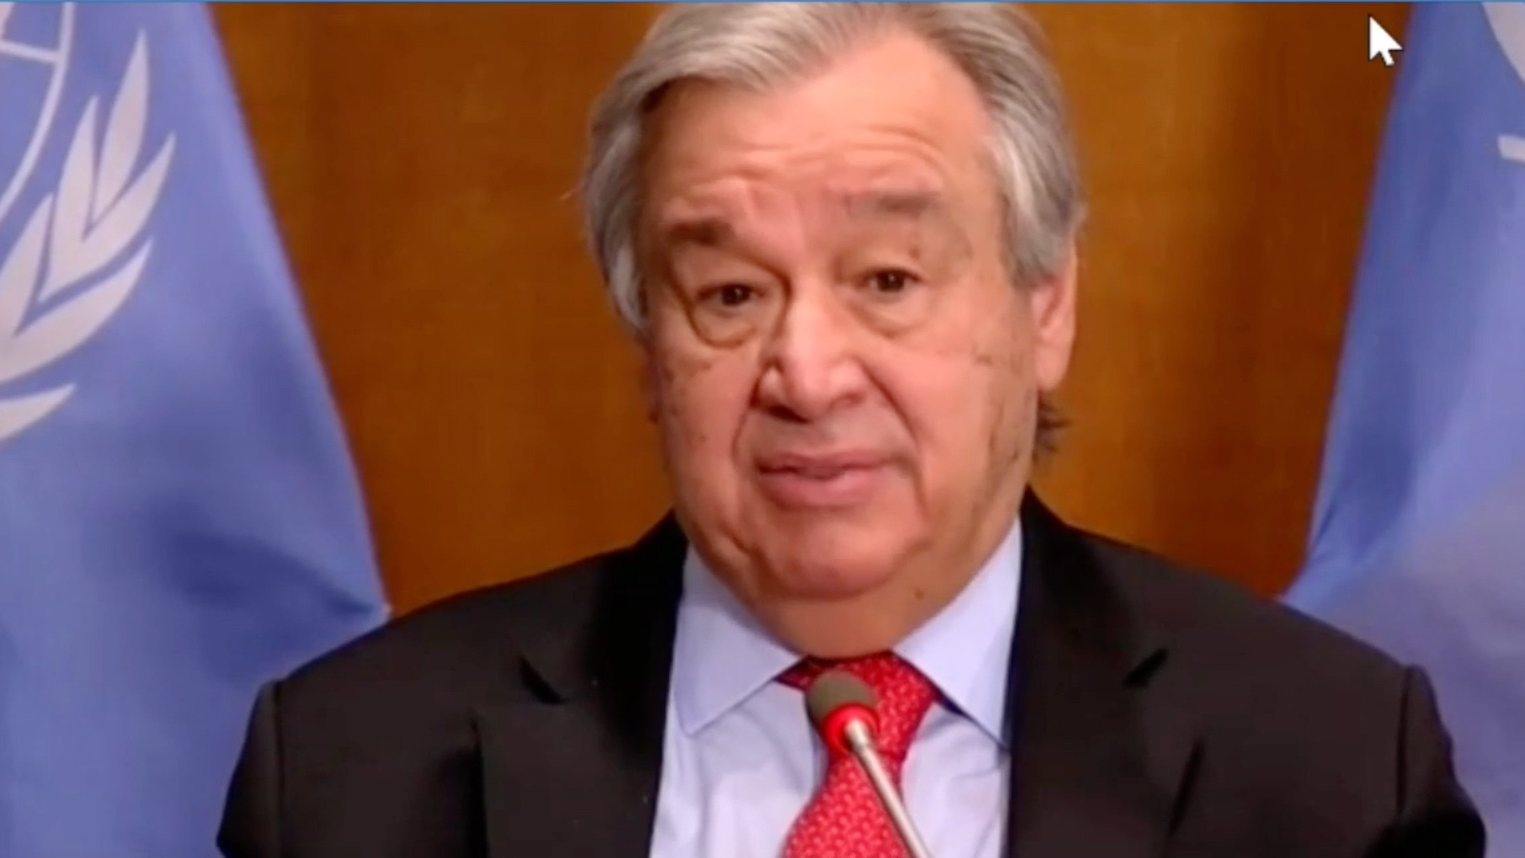 epa08964974 A still image obtained from a live video feed by the World Economic Forum (WEF) shows Secretary-General of the United Nations Antonio Guterres as he delivers Special Address during a virtual meeting of the World Economic Forum, 25 January 2021. The World Economic Forum (WEF) was scheduled to take place in Davos. Due to the Coronavirus outbreak, it will be held online in a digital format from January, 25-29.  EPA/PASCAL BITZ / WEF HANDOUT MANDATORY CREDIT / HANDOUT EDITORIAL USE ONLY/NO SALES